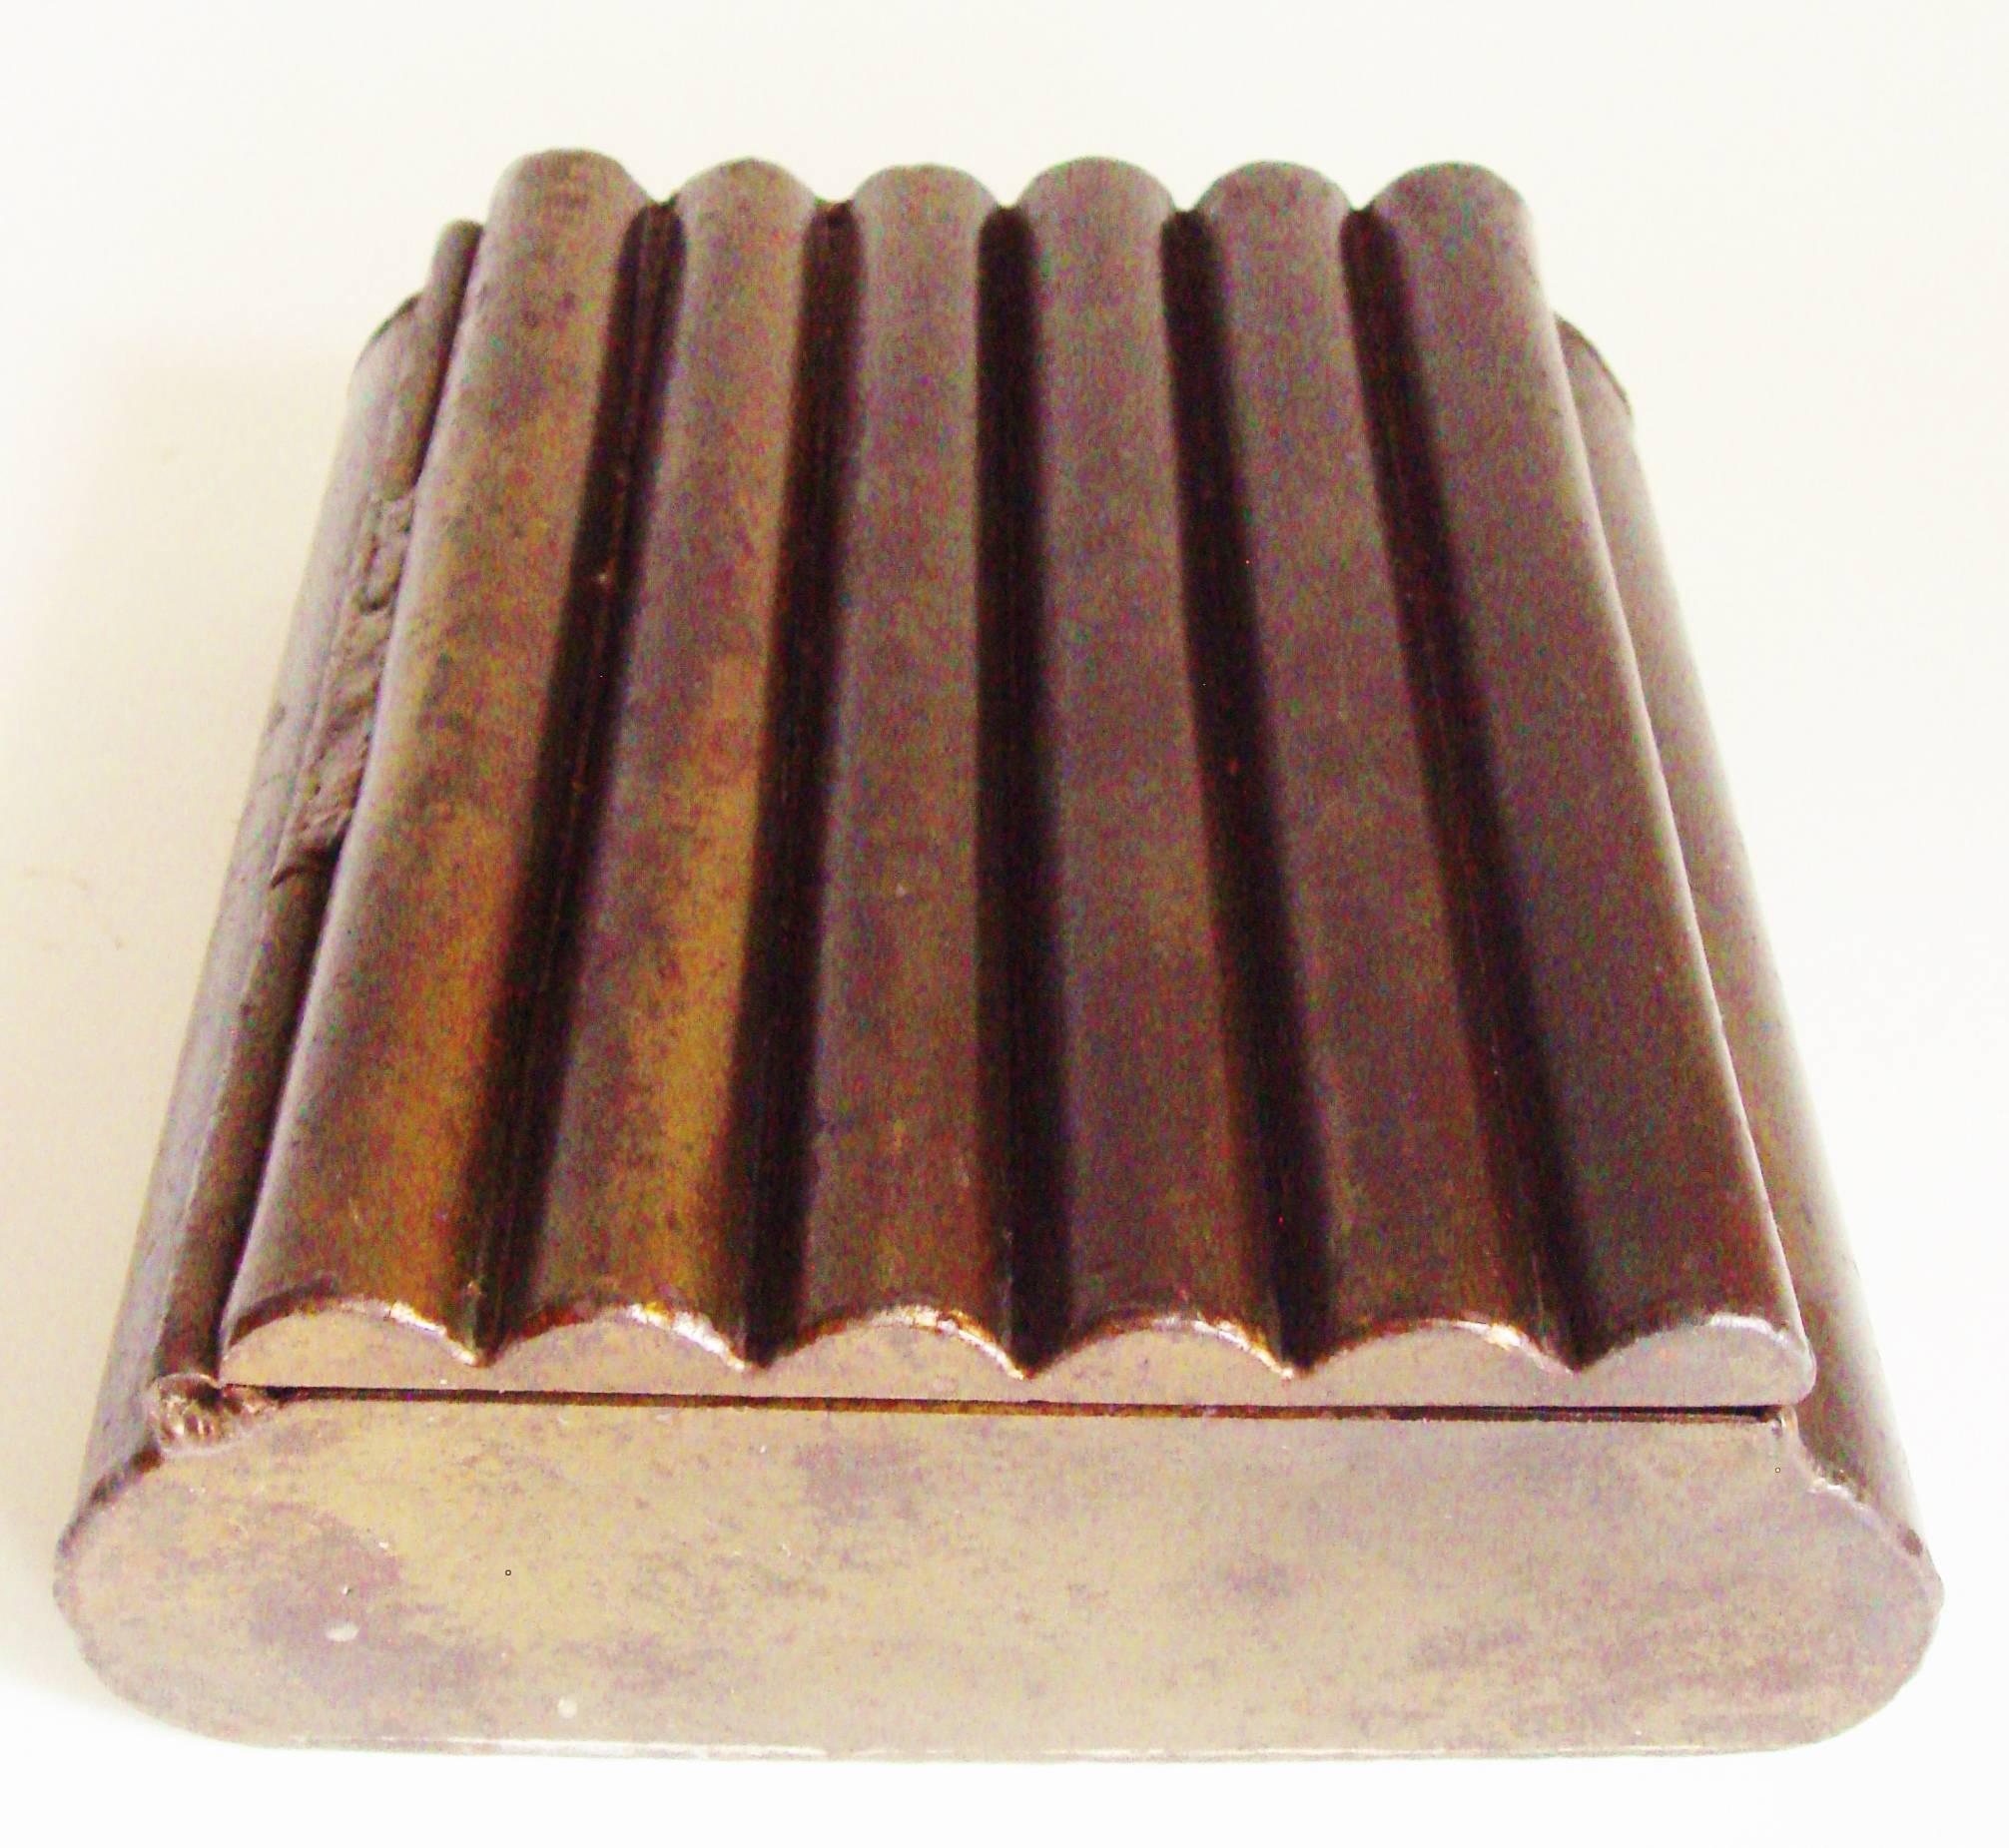 This Canadian Art Deco cigarette or trinket box would appear to have been made by someone working on the line at the Curtiss-Reid Aircraft Company, Montreal one year after their establishment in 1928. (The year when the Curtiss Aeroplane and Motor